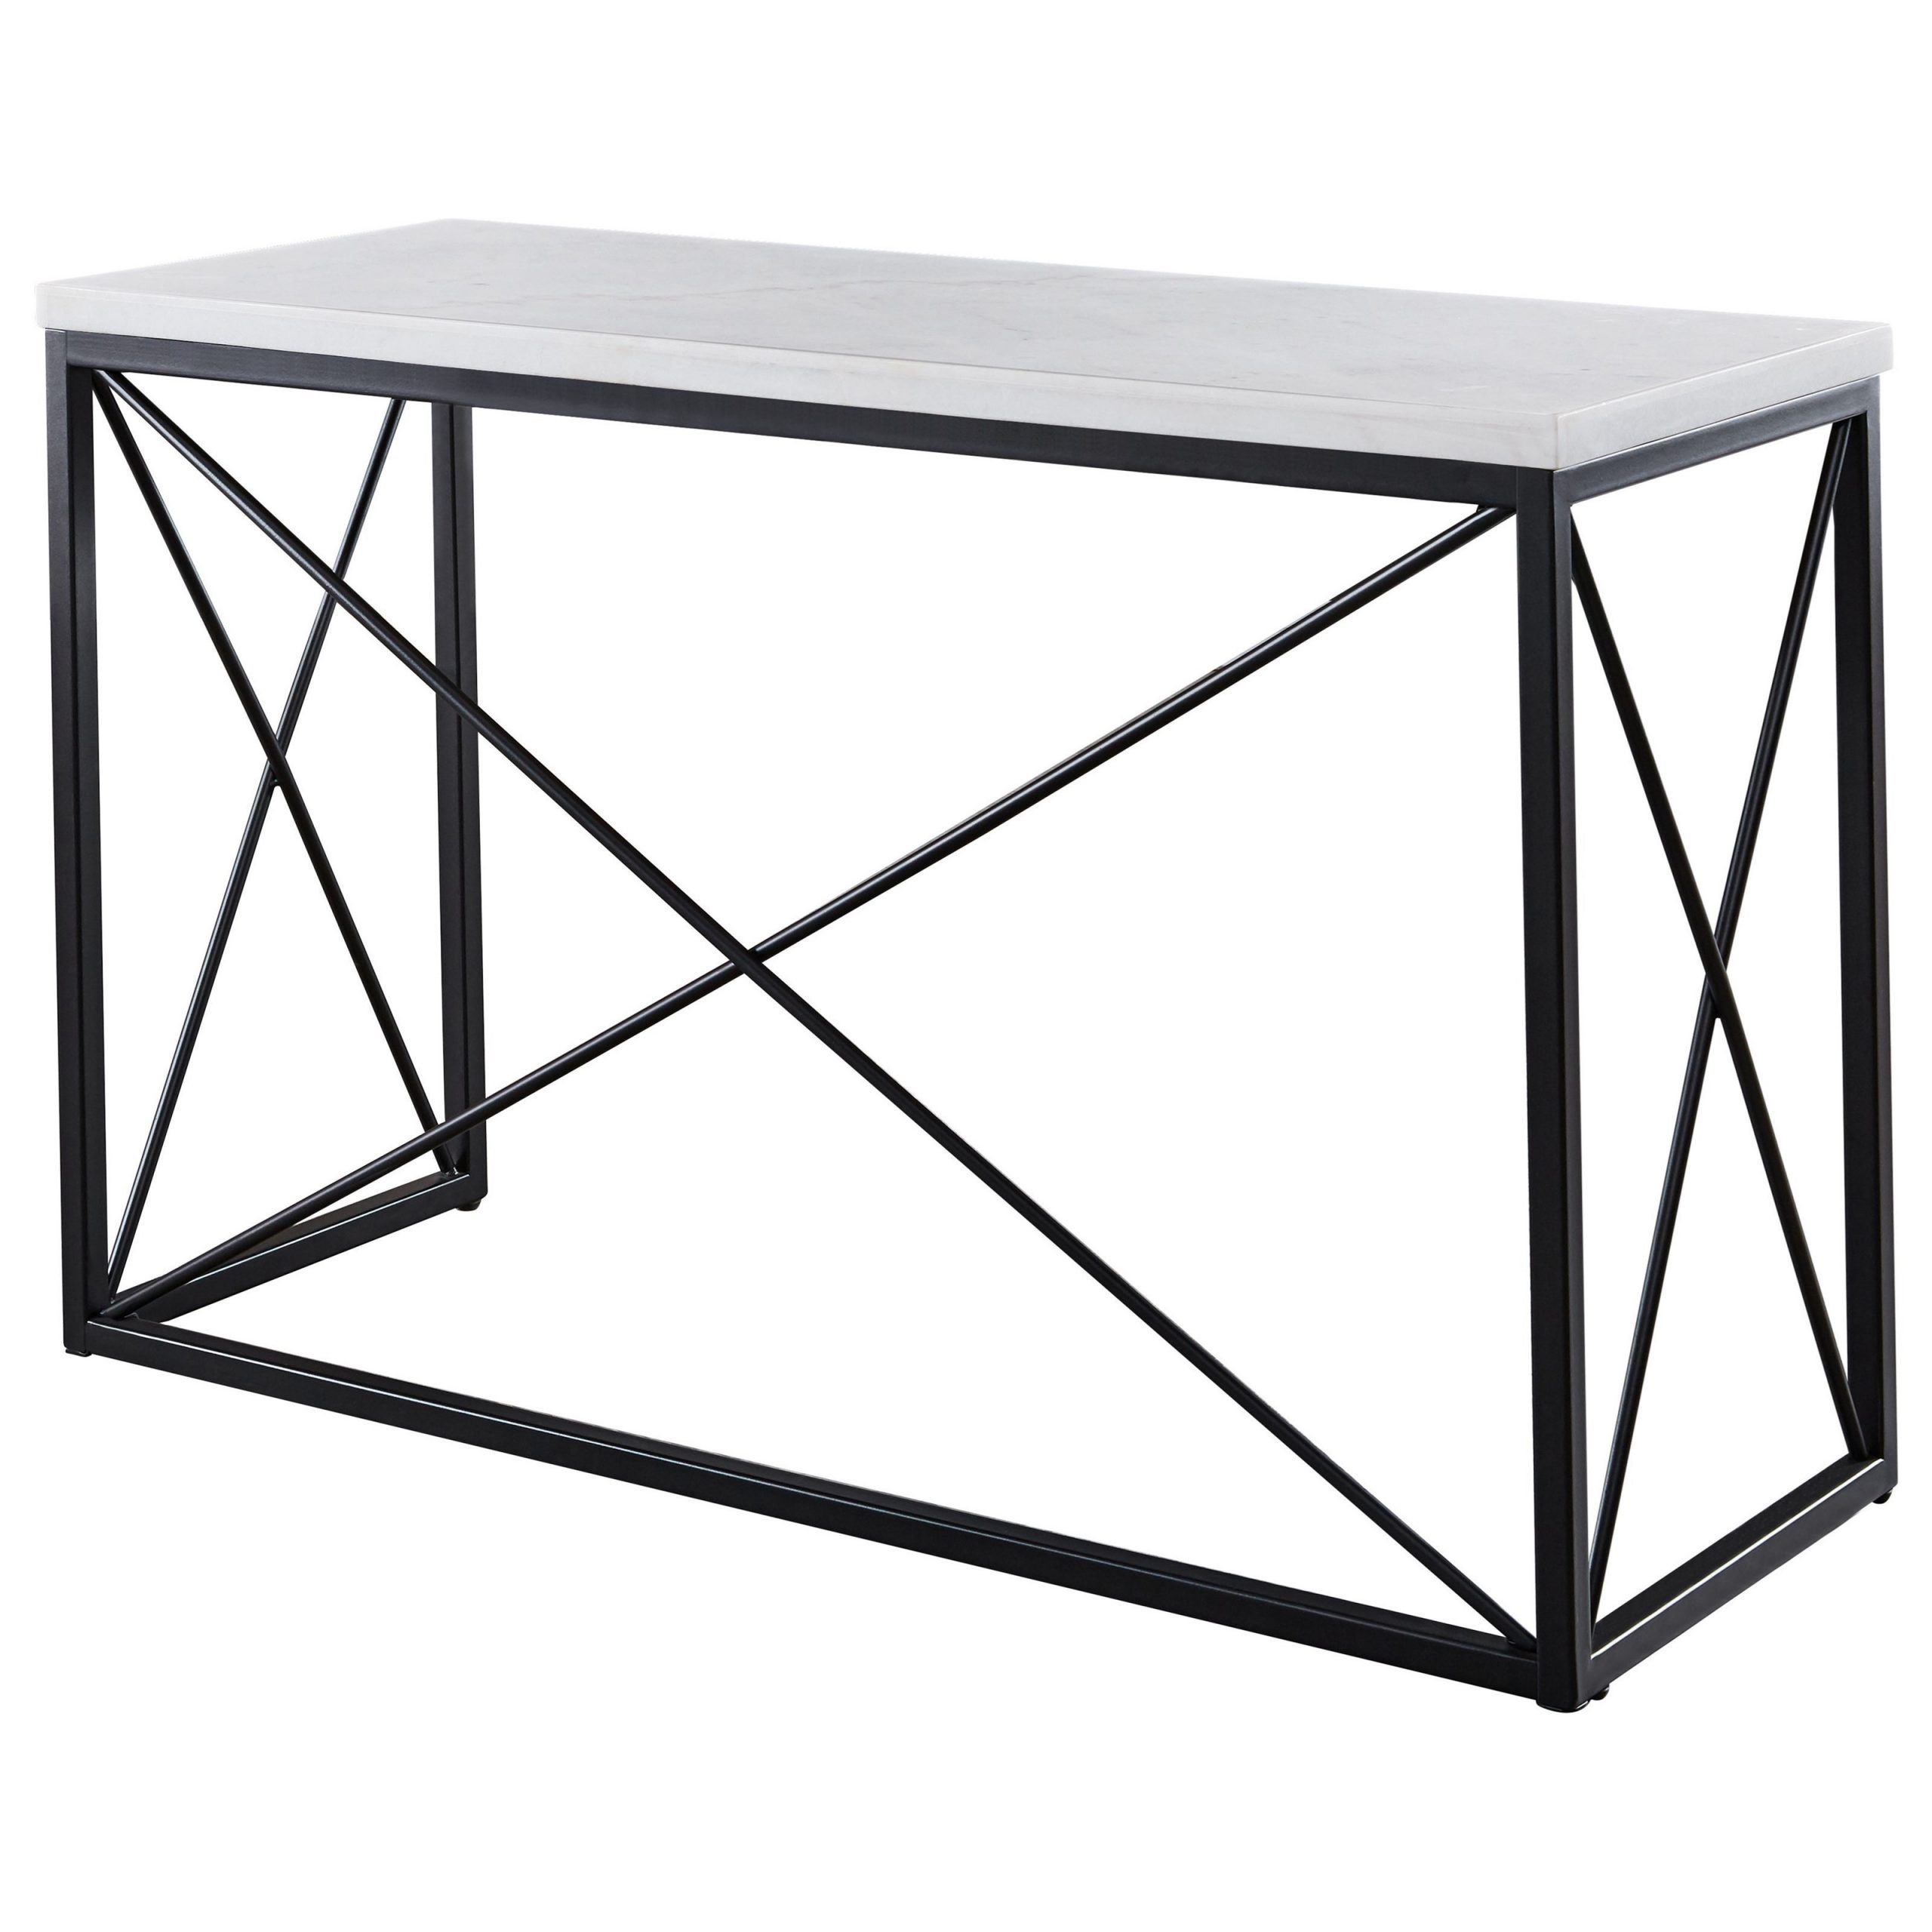 Steve Silver Skyler Contemporary White Marble Top Pertaining To Silver Leaf Rectangle Console Tables (Photo 12 of 20)